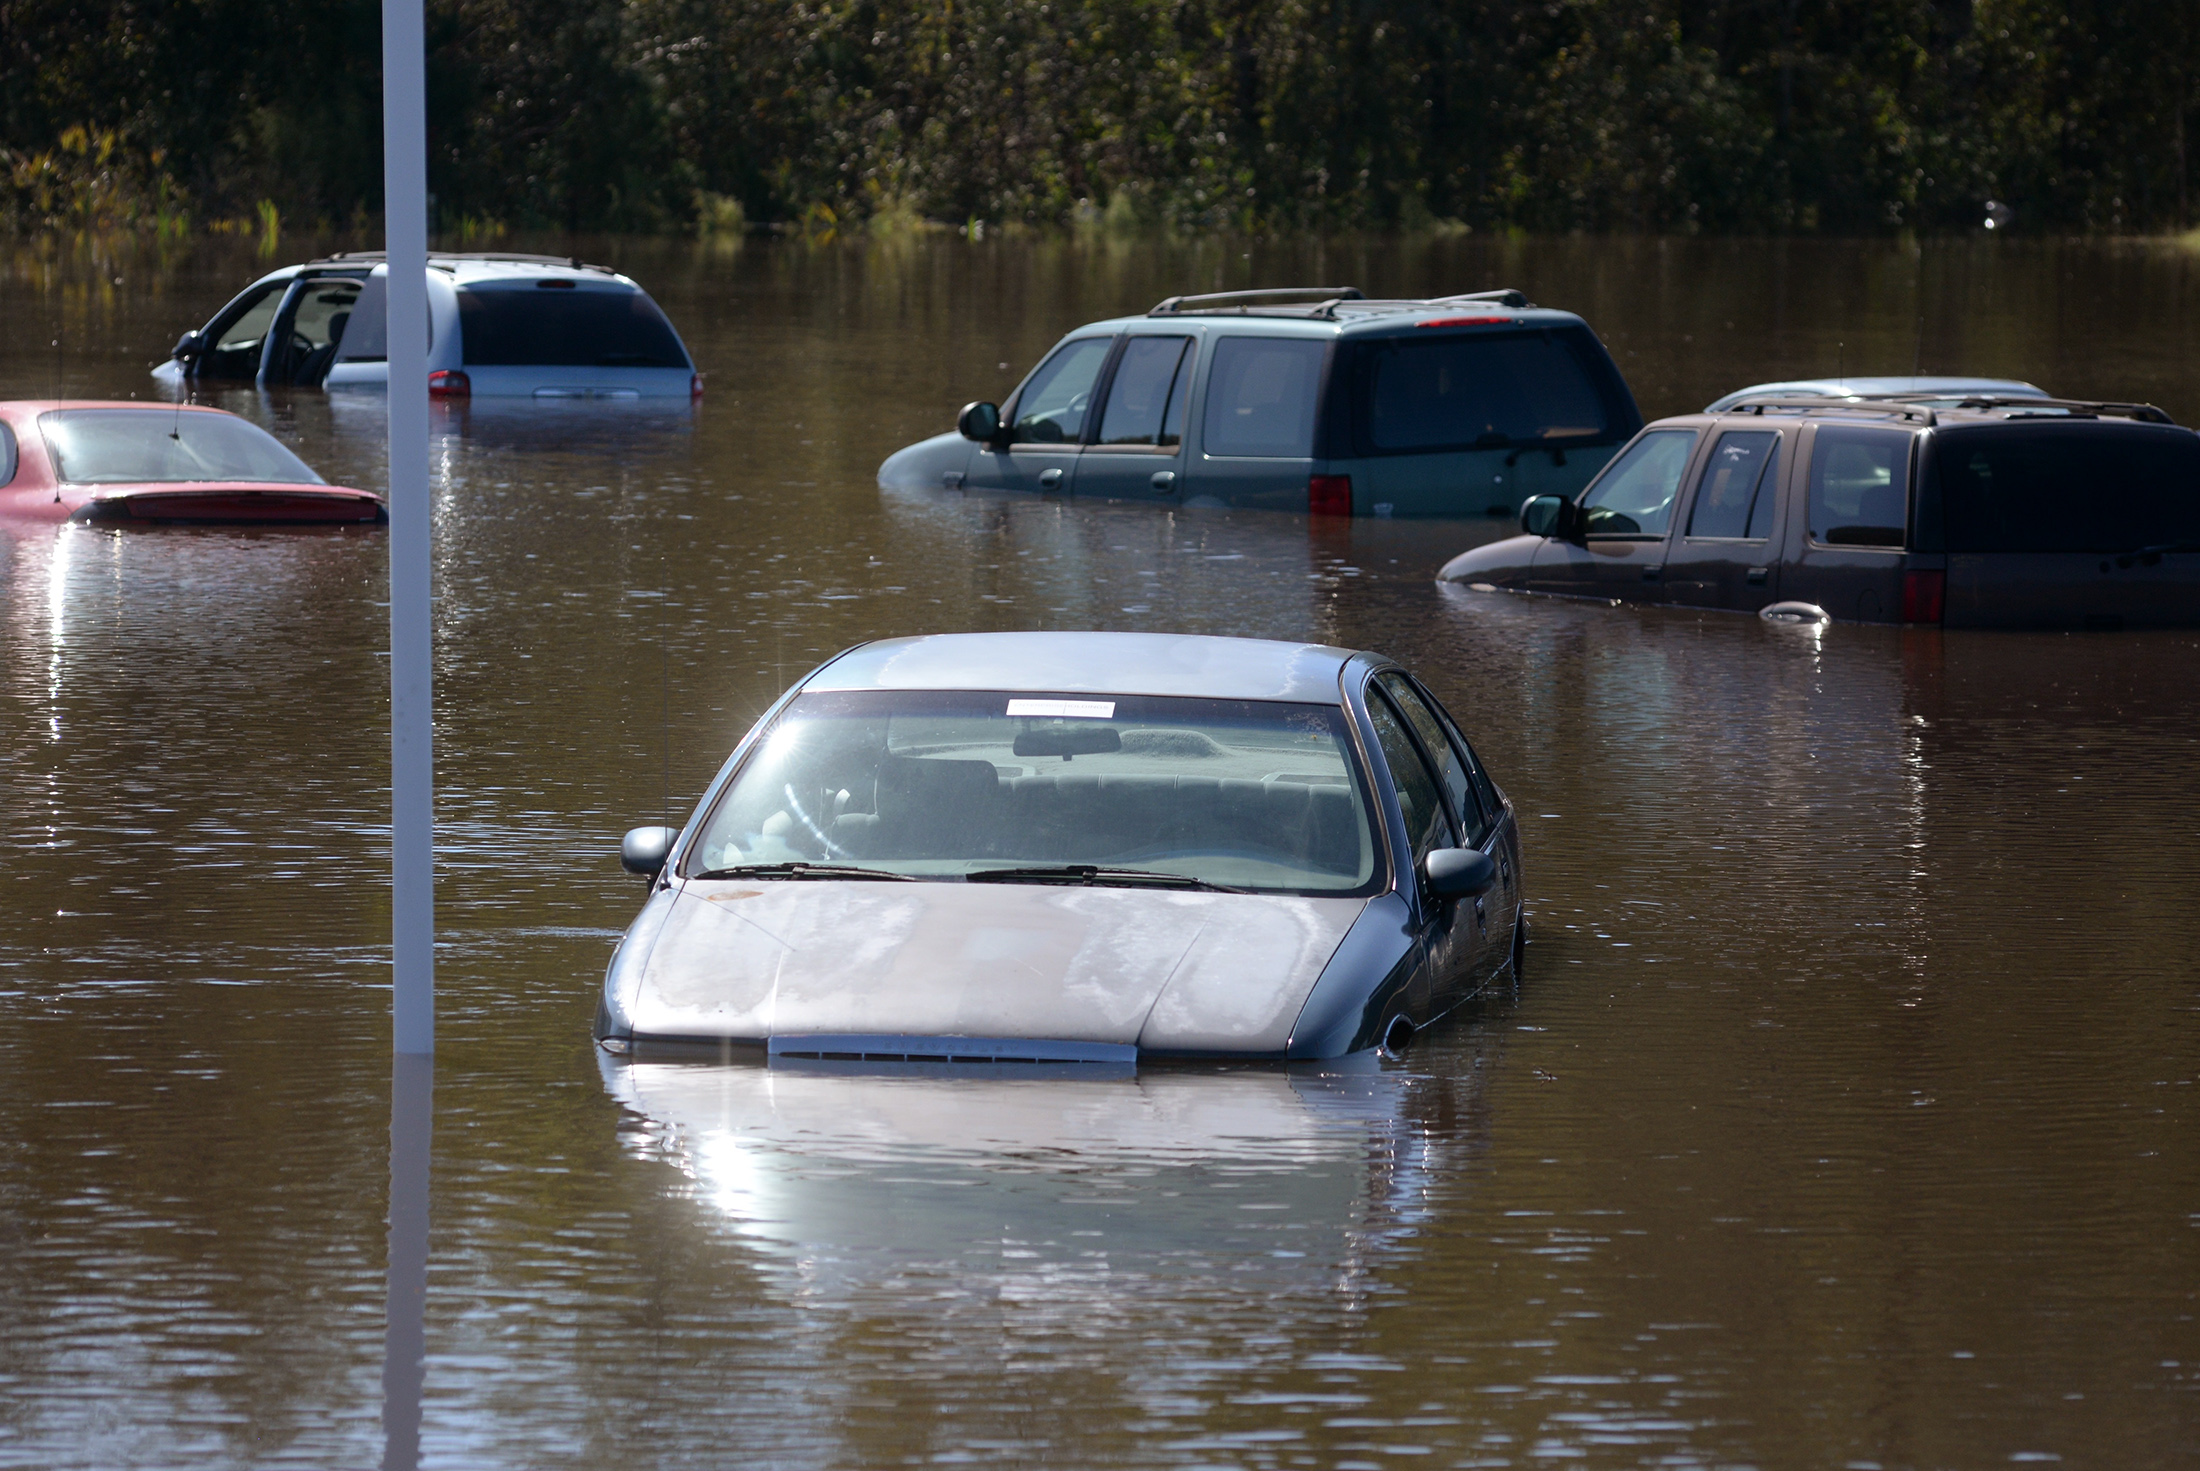 PHOTO: Used cars submerged in lot in flood waters rest along US 70W in Kinston, North Carolina, Oct. 12, 2016, as the Neuse River continues to rise.